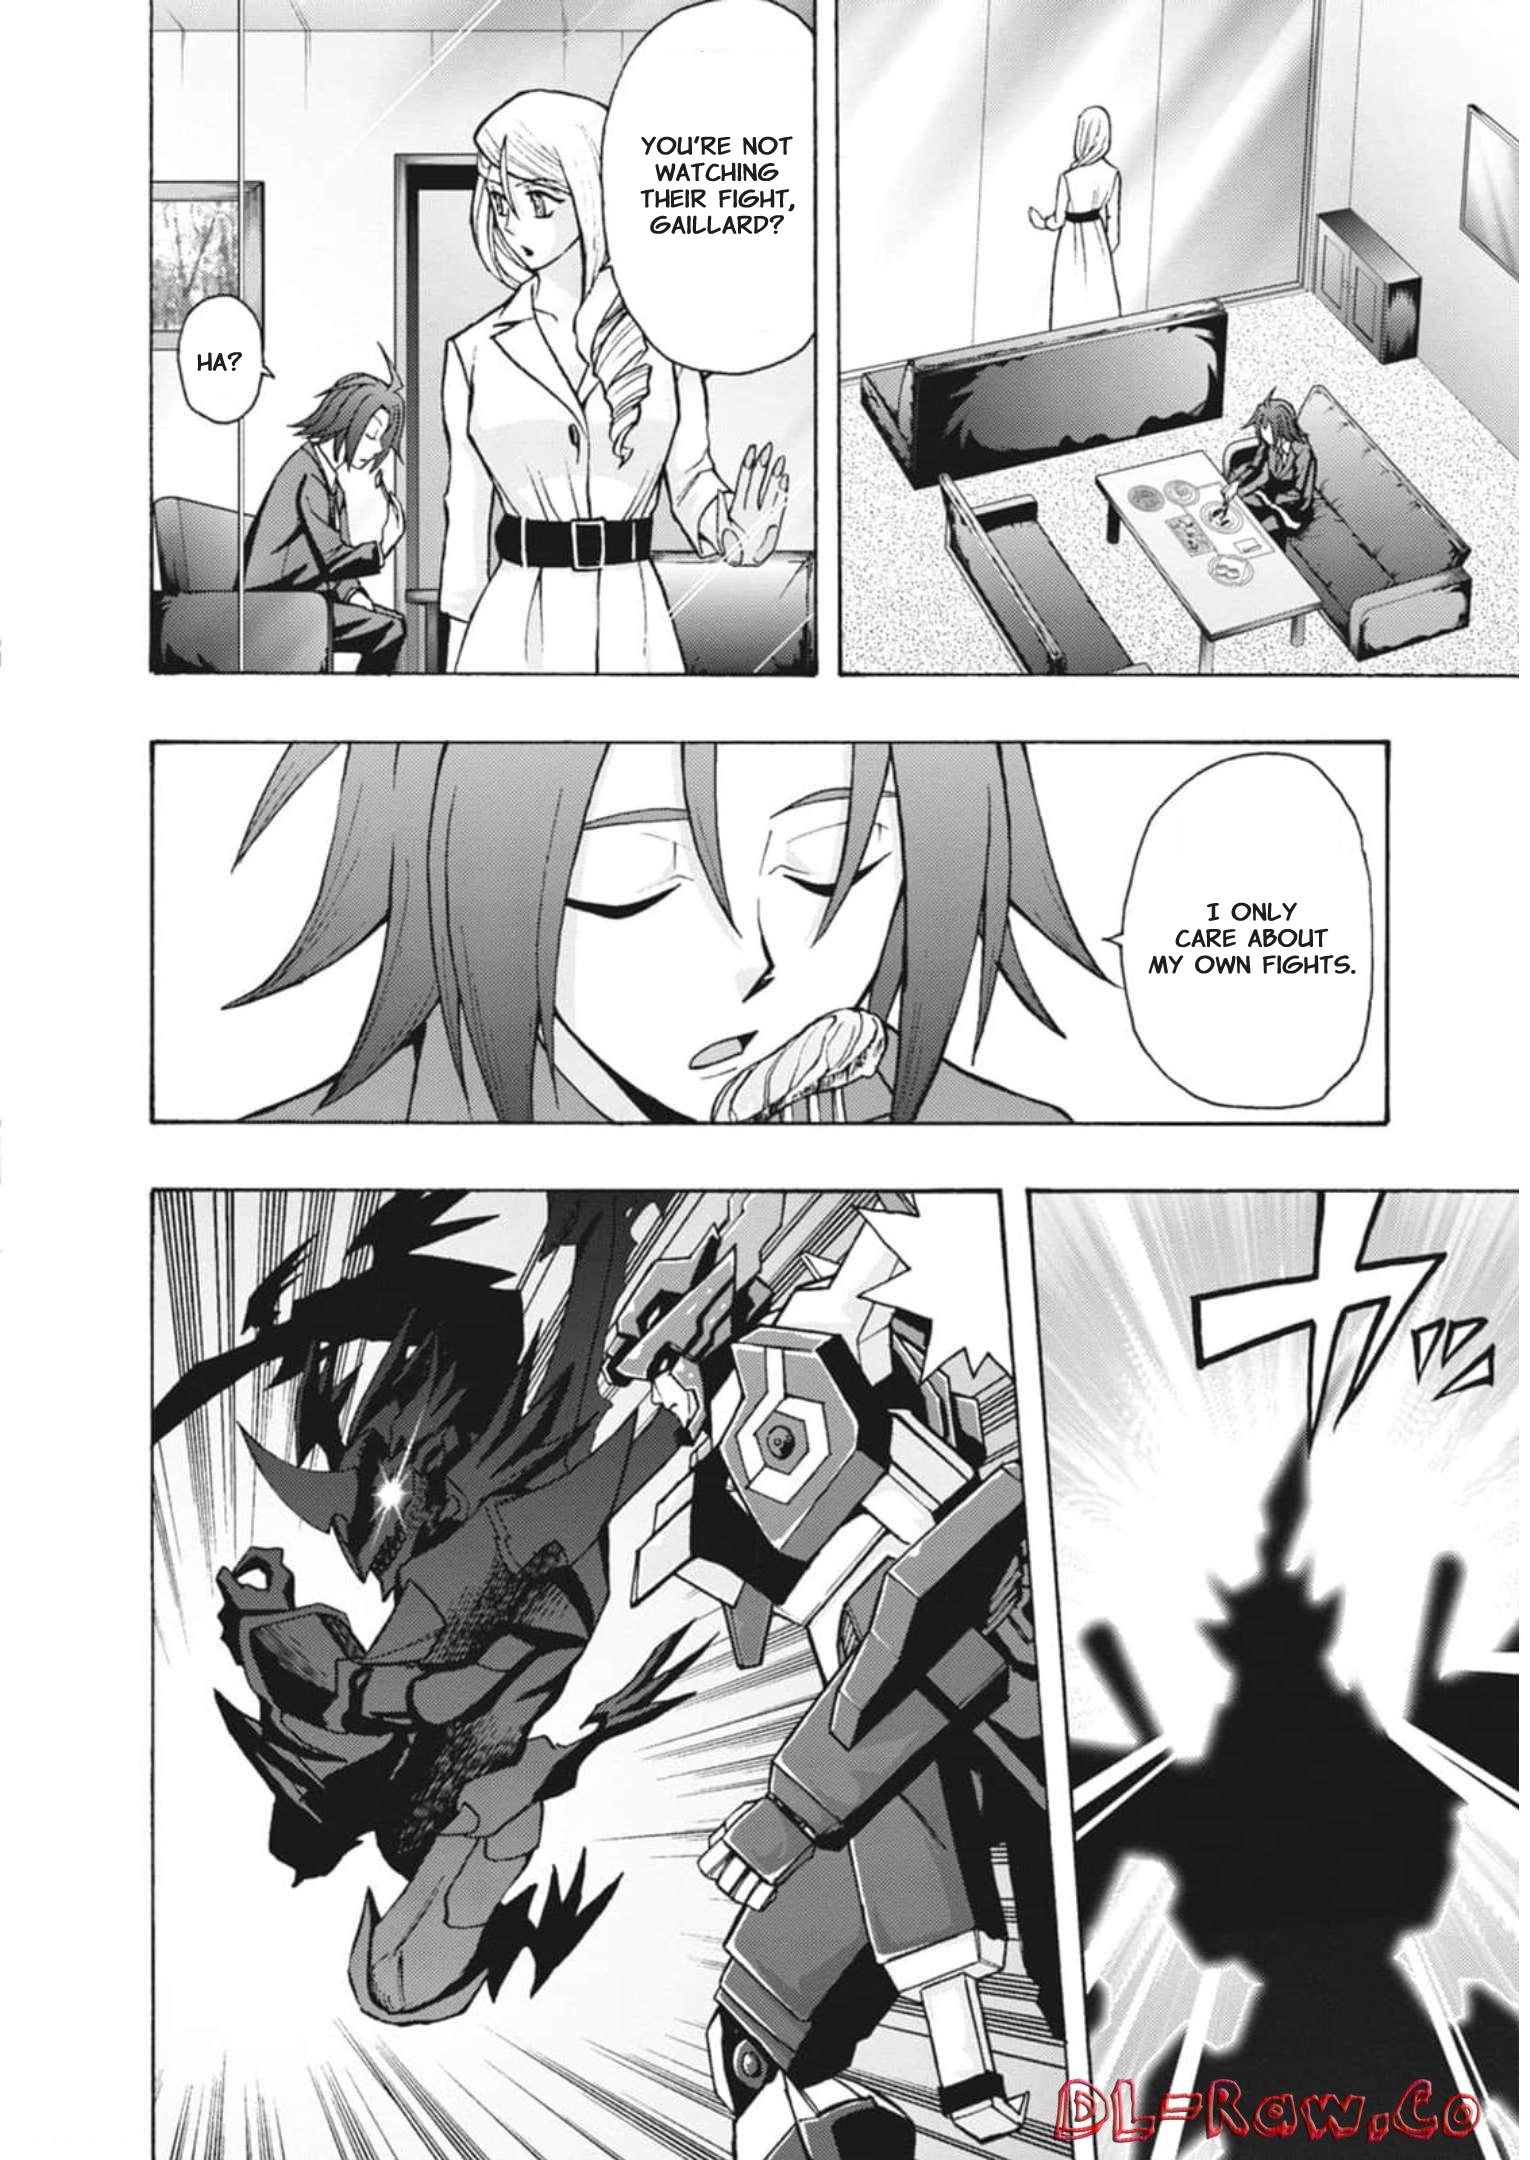 Cardfight!! Vanguard: Turnabout - Page 3